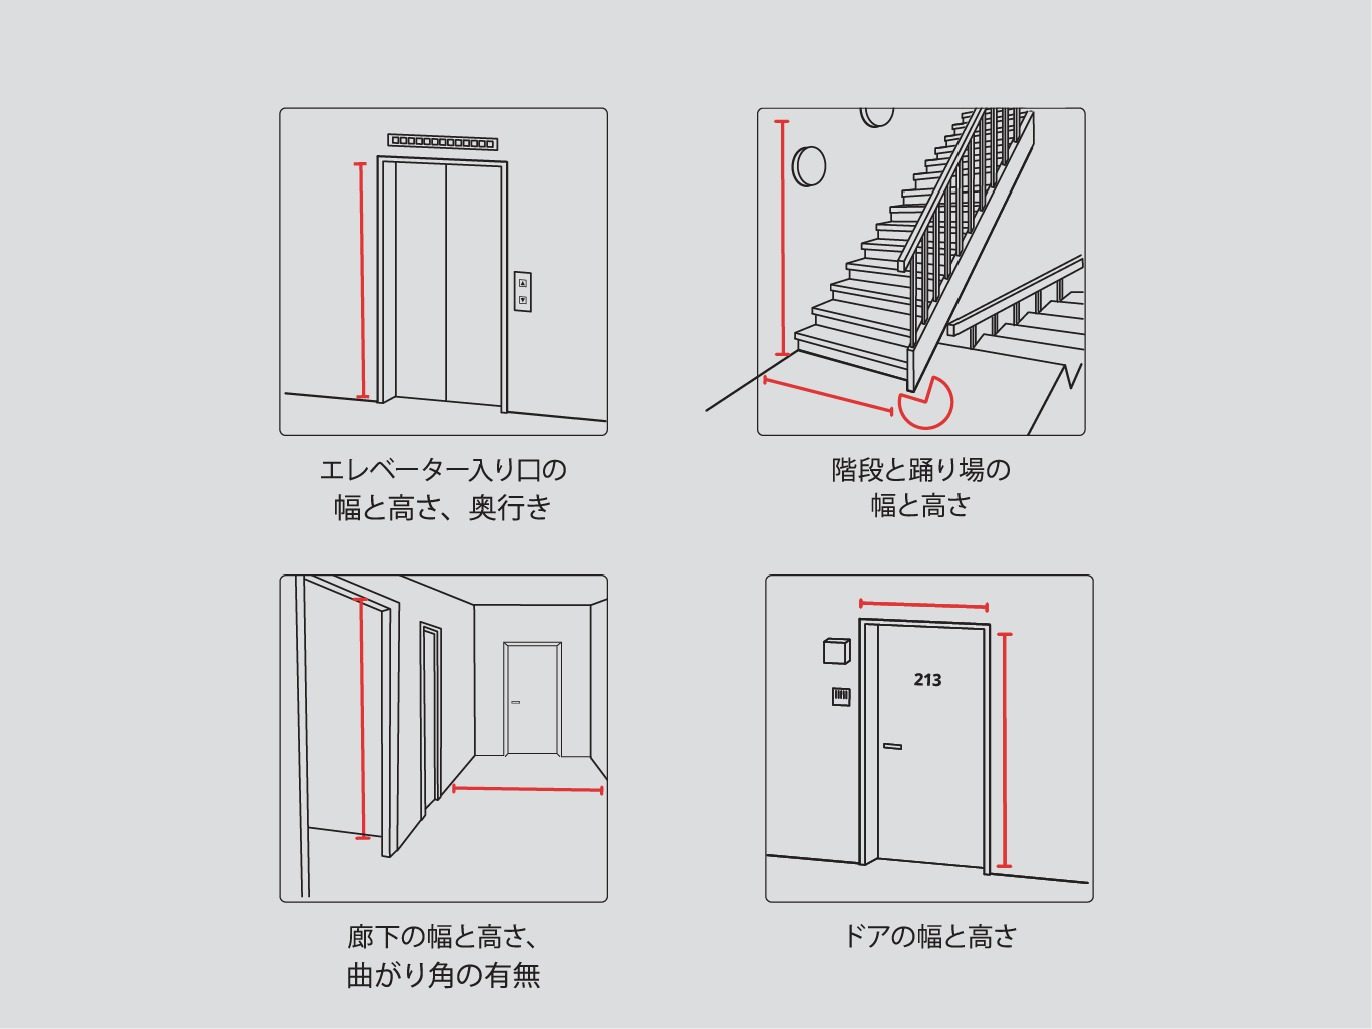 Four drawings showing how to measure height and turning radius in stairwells, doorways, and elevators.